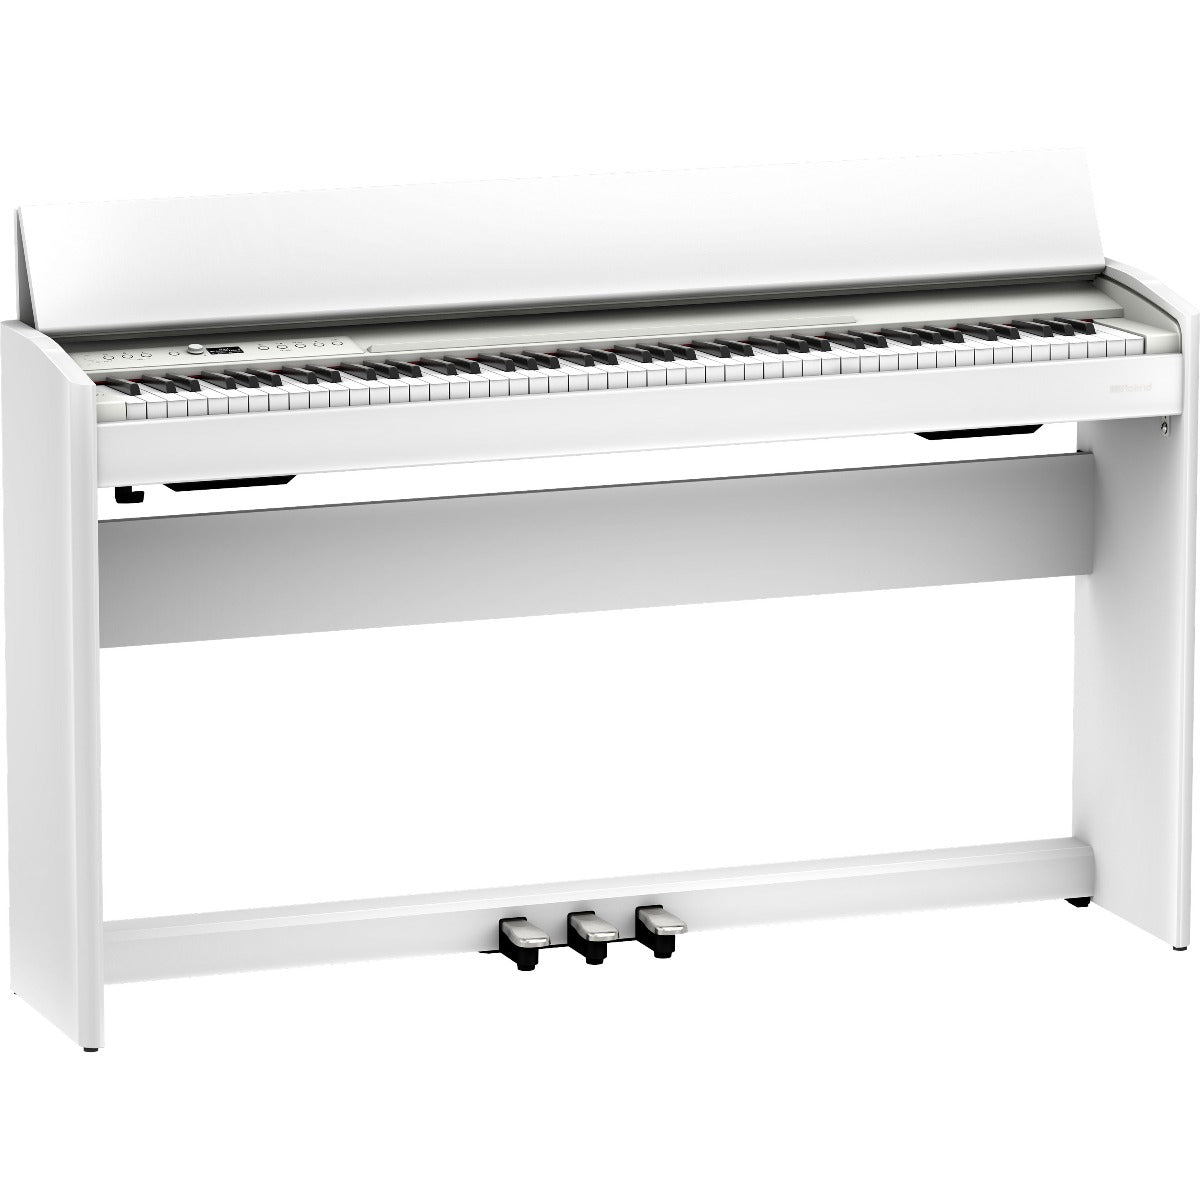 3/4 view of Roland F701 Digital Piano - White with key cover open showing front, top and left side